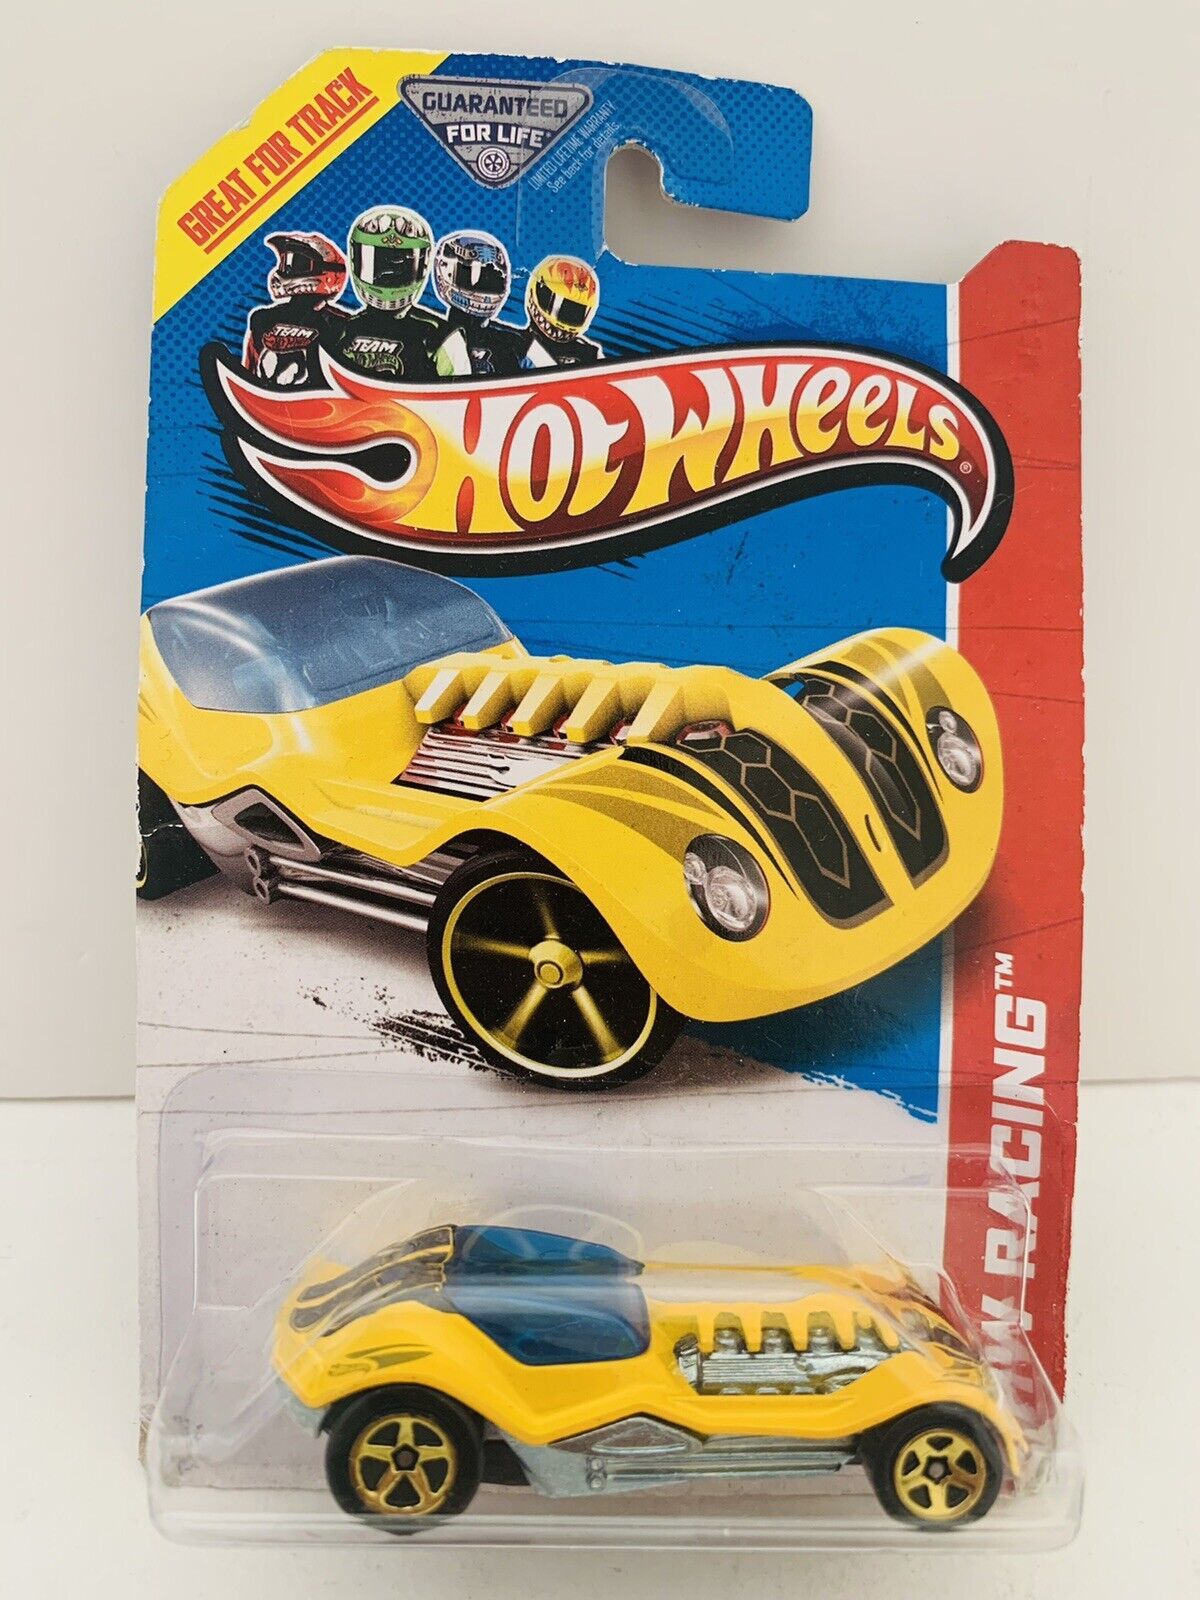 Primary image for Hot Wheels Racing Thrill Racers Dieselboy Car Figure (113/250) *Yellow Version*